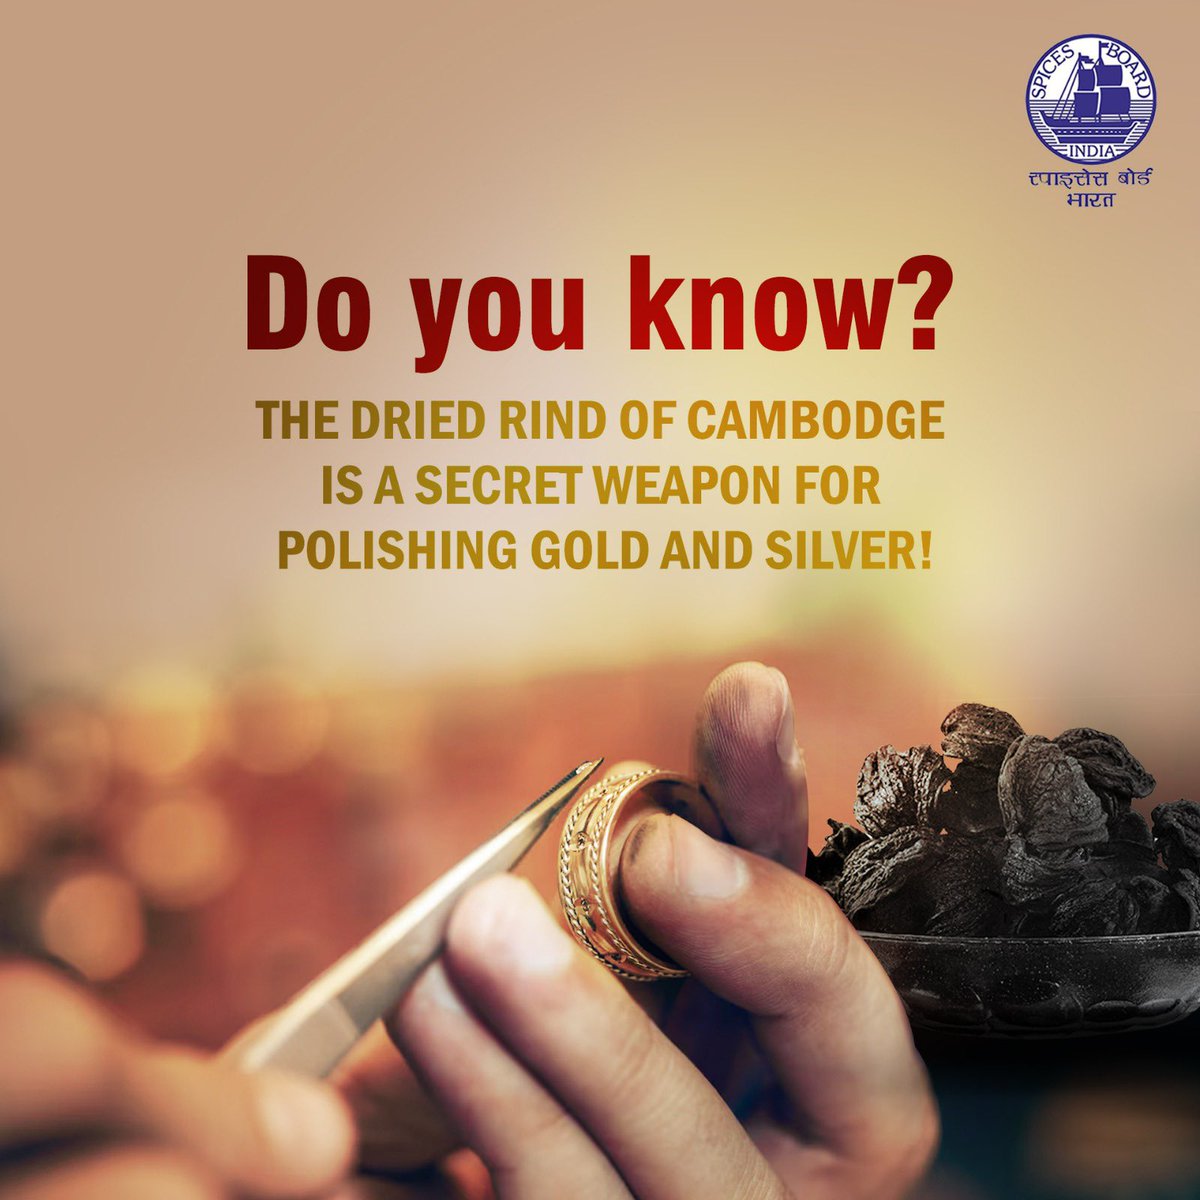 Unveil the hidden power of Cambodge! @doc_goi #spicesboard #Cambodge #incrediblespicesofindia